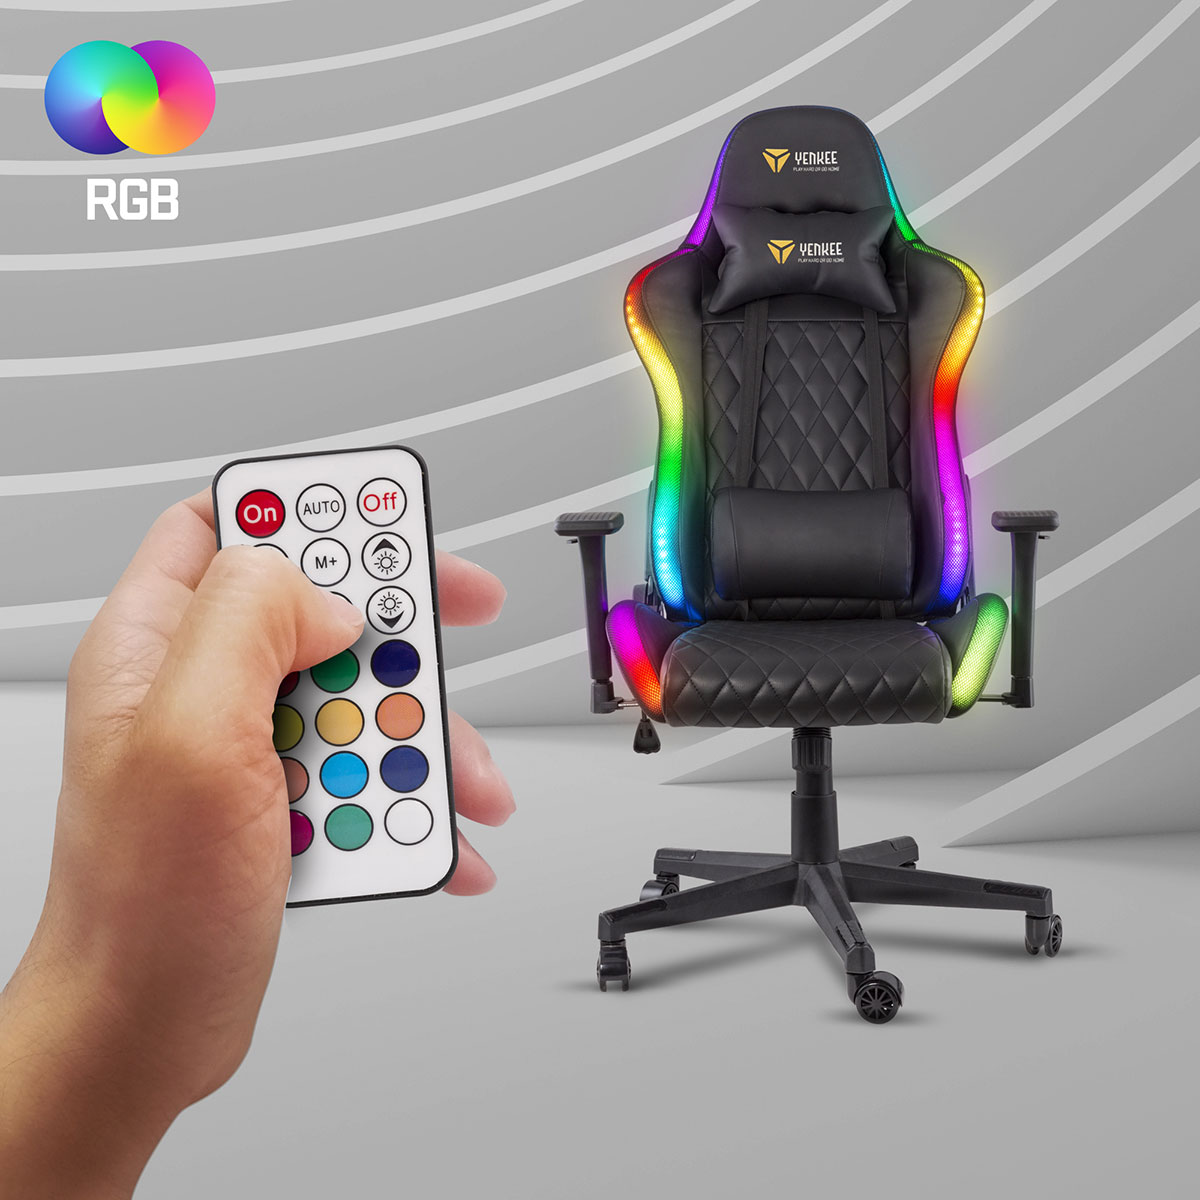 Strong RGB backlight adjustable by remote control